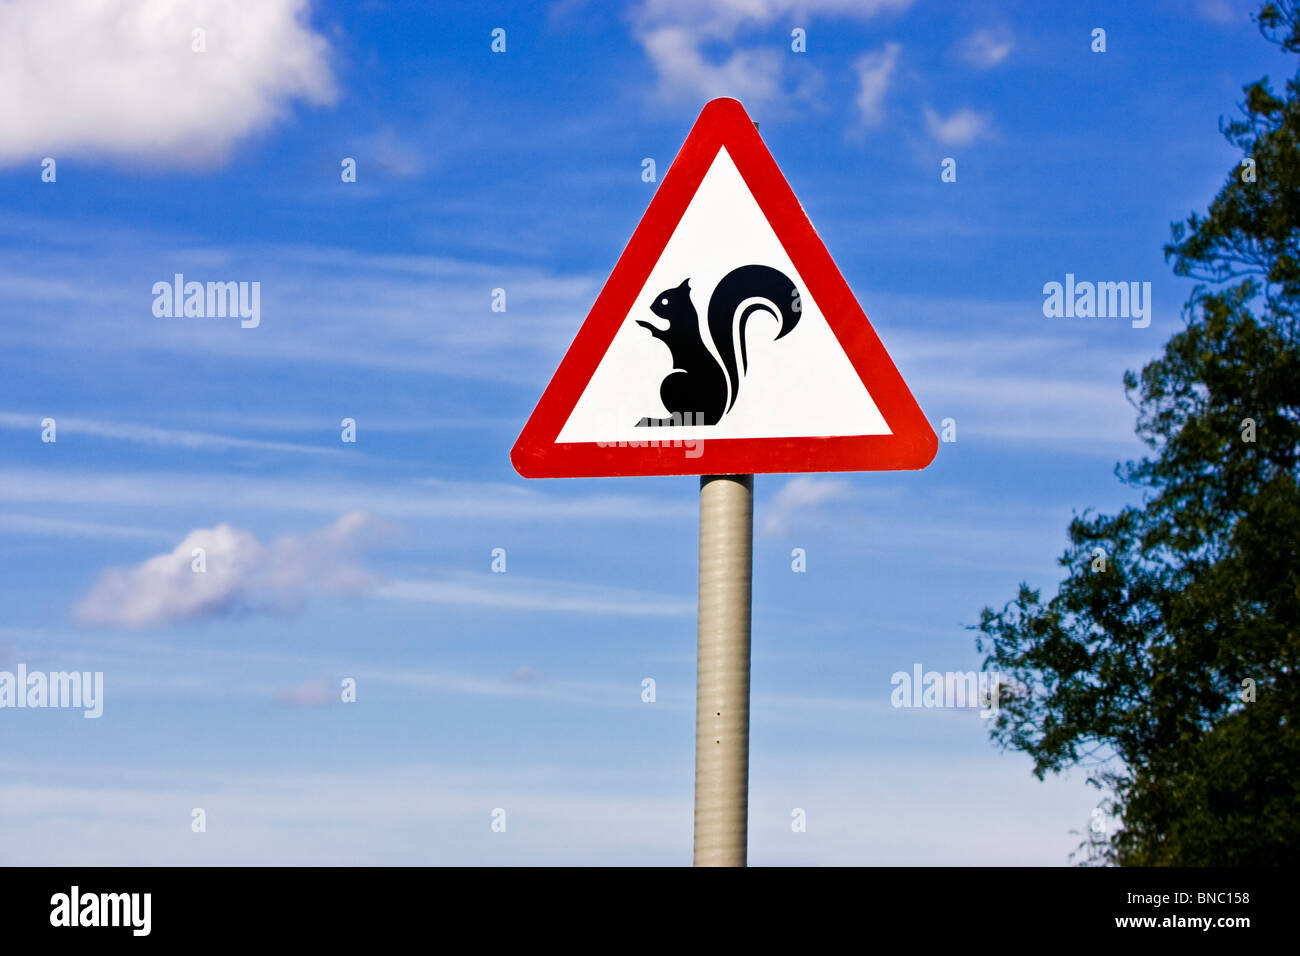 Warning sign - Squirrels on the road England UK Stock Photo